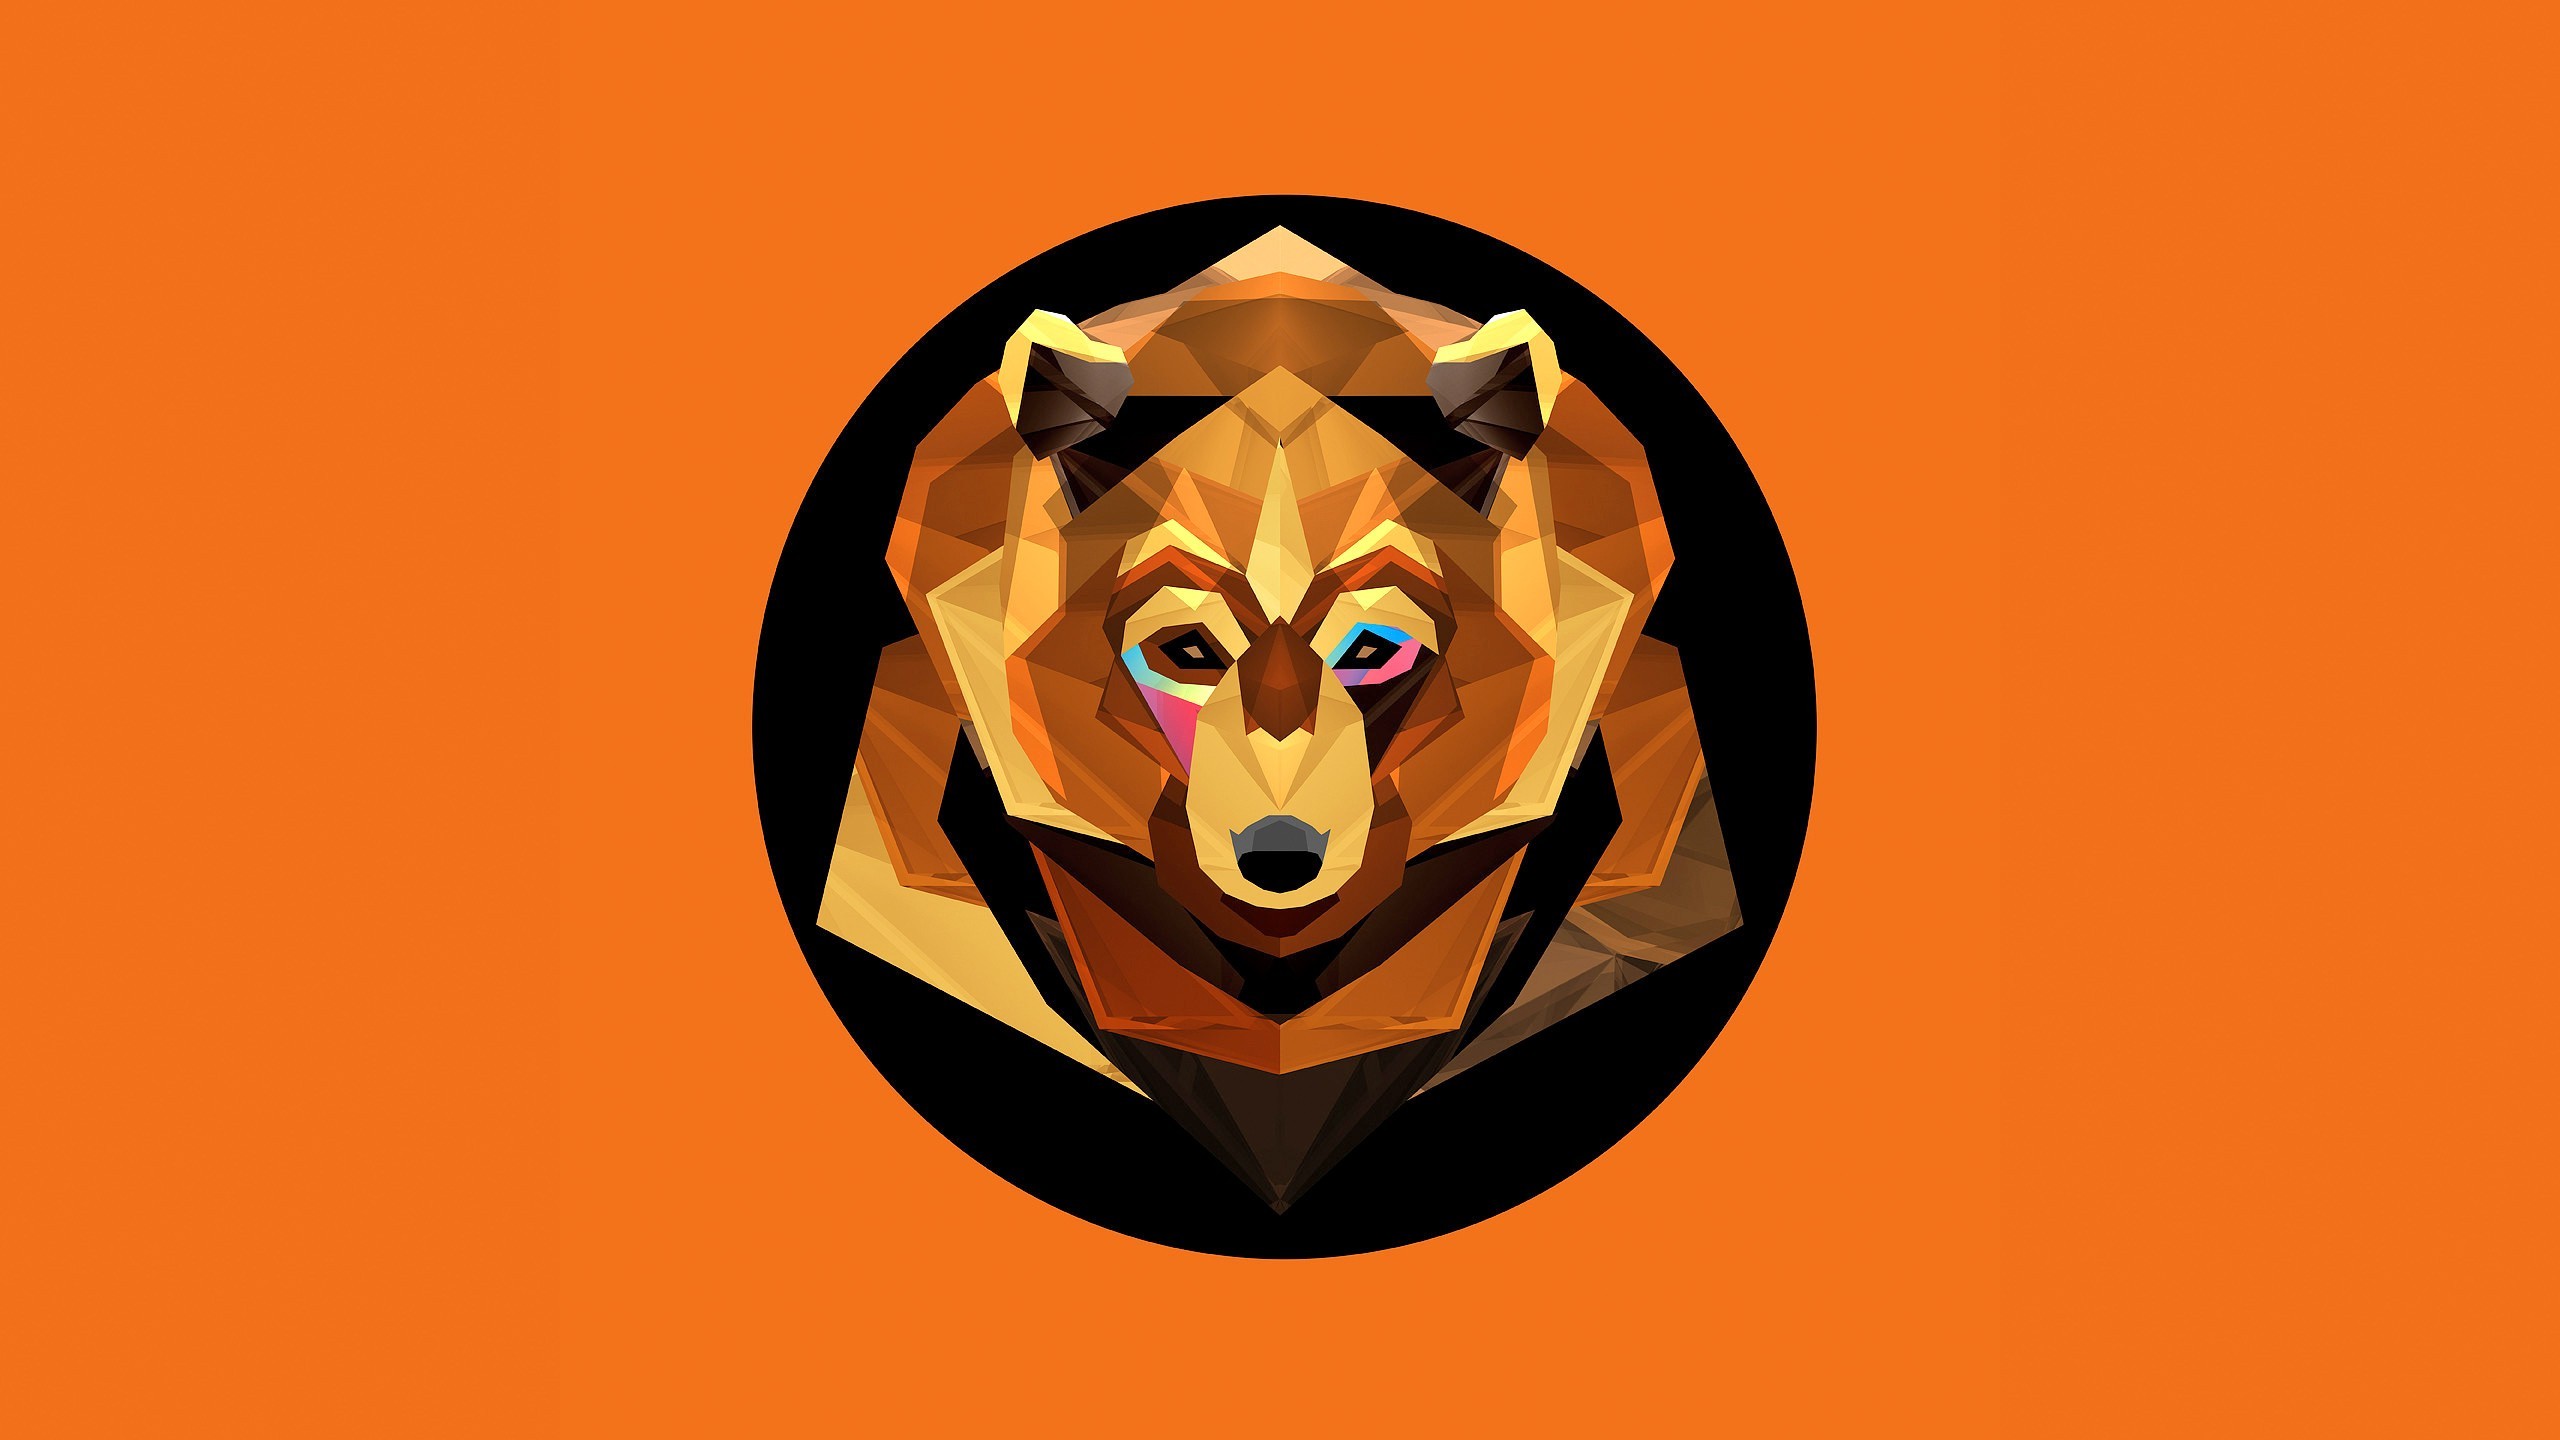 2560x1440 animals bears digital art vector art minimalism low poly geometry circle  orange background wallpapers hd desktop and mobile backgrounds